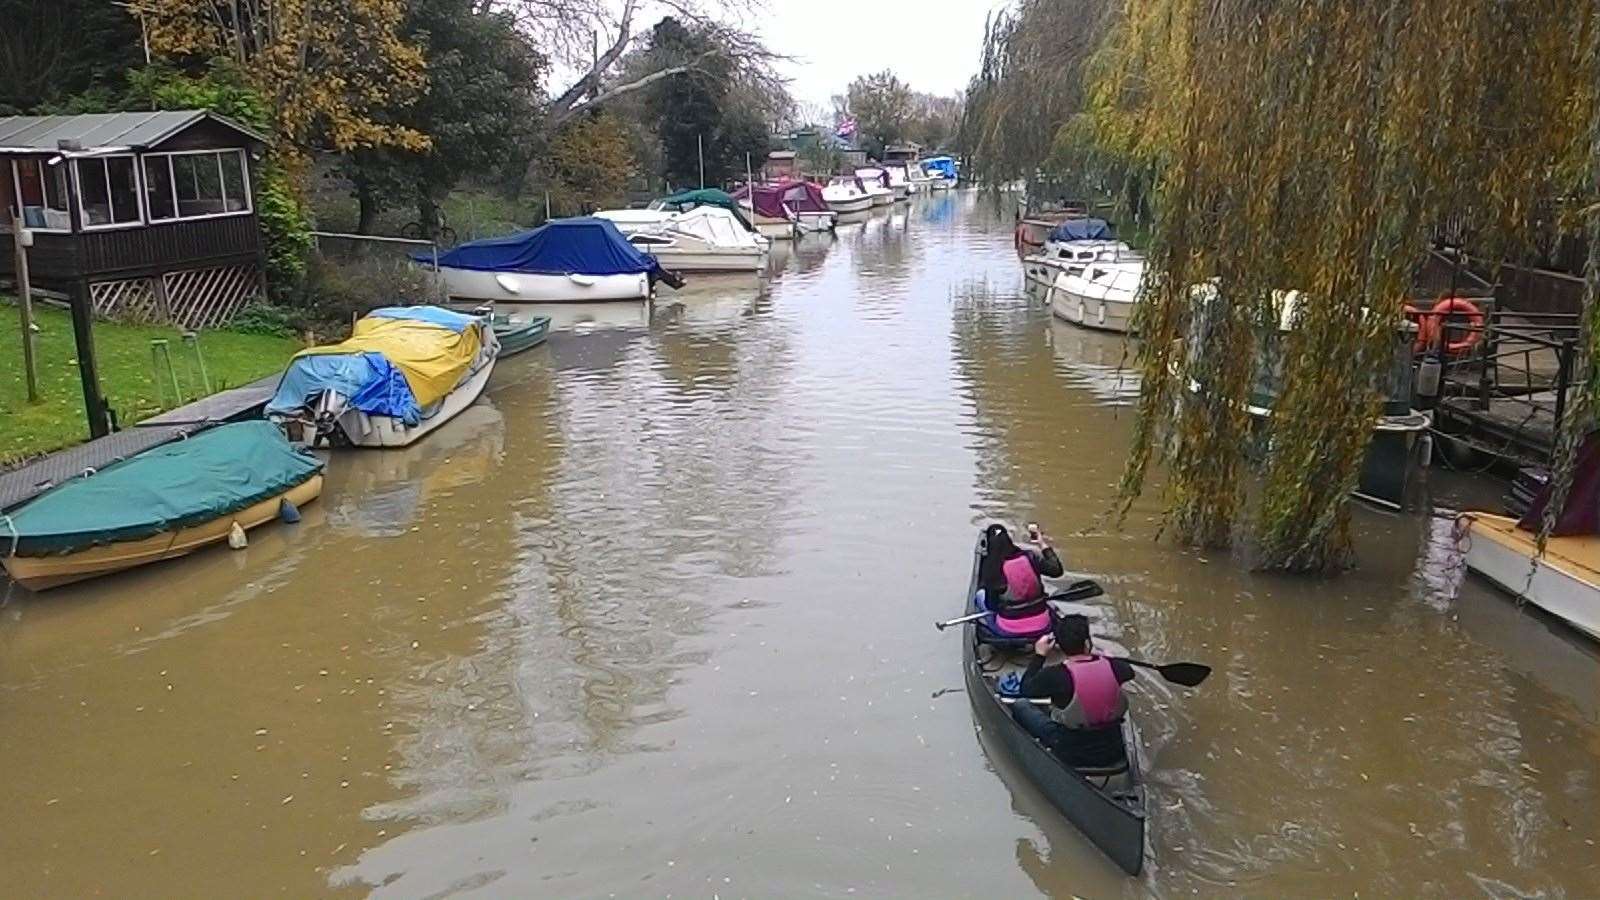 The Environment Agency has issued a flood alert for Grove Ferry